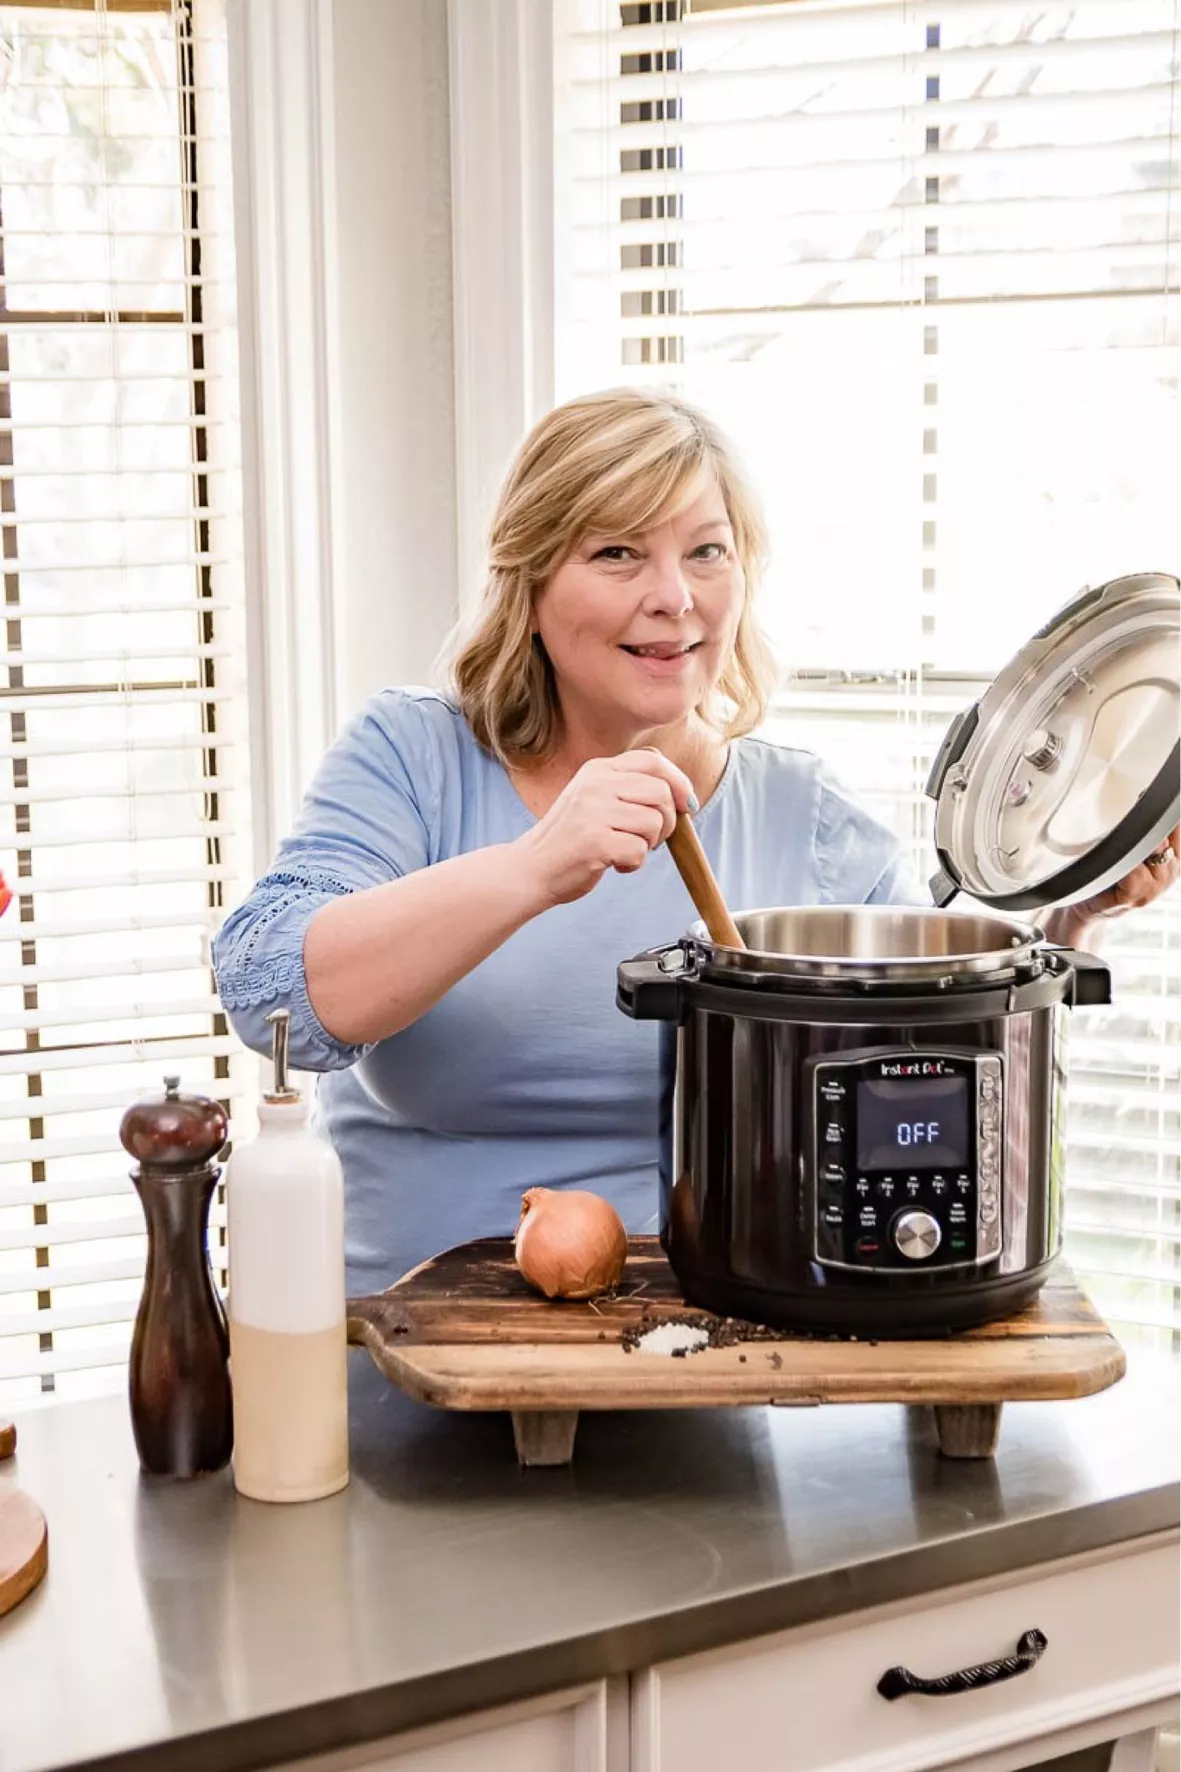 Instant Pot Electric Pressure Cooker: Such a Game Changer